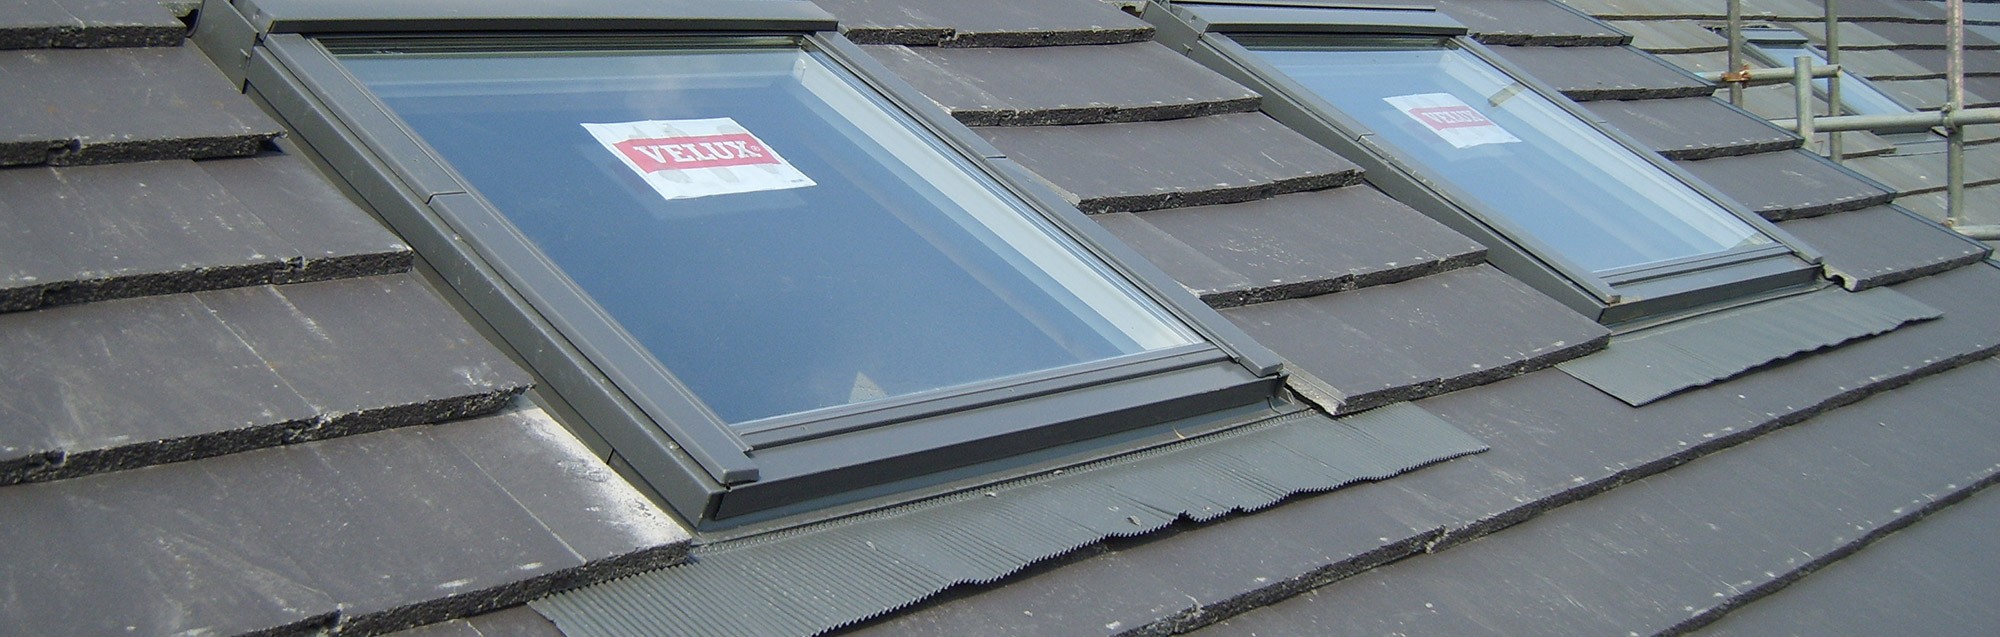 Velux fitters